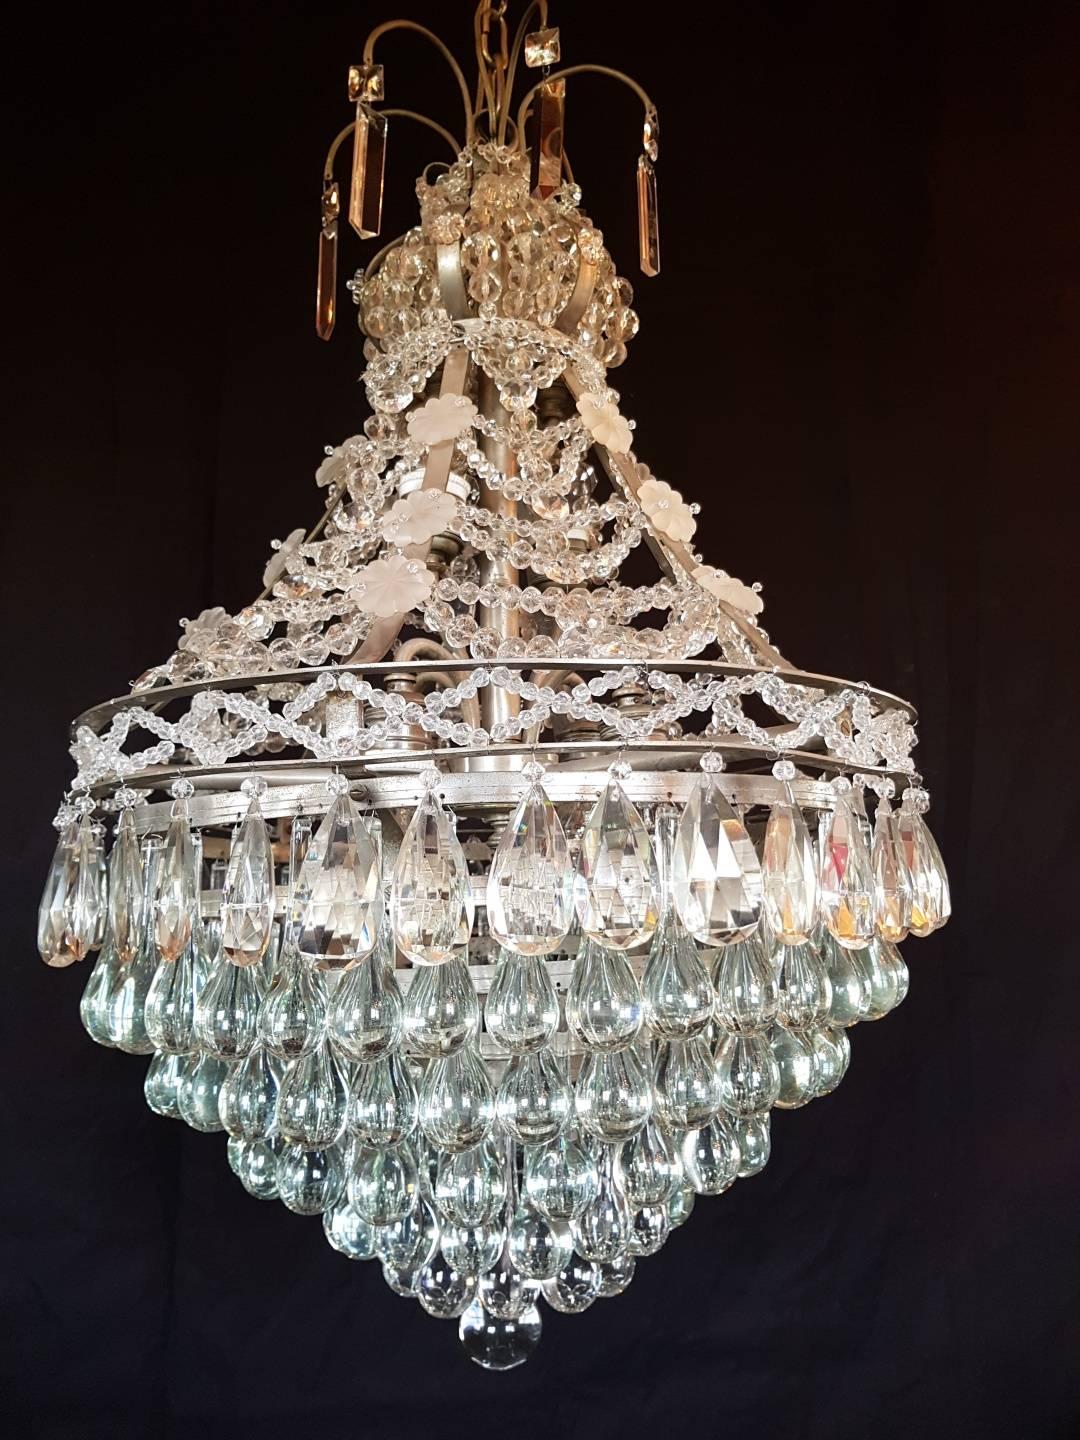 Waterfall Chandelier in Nickel/ Silver Color empire In Good Condition For Sale In Oldebroek, NL